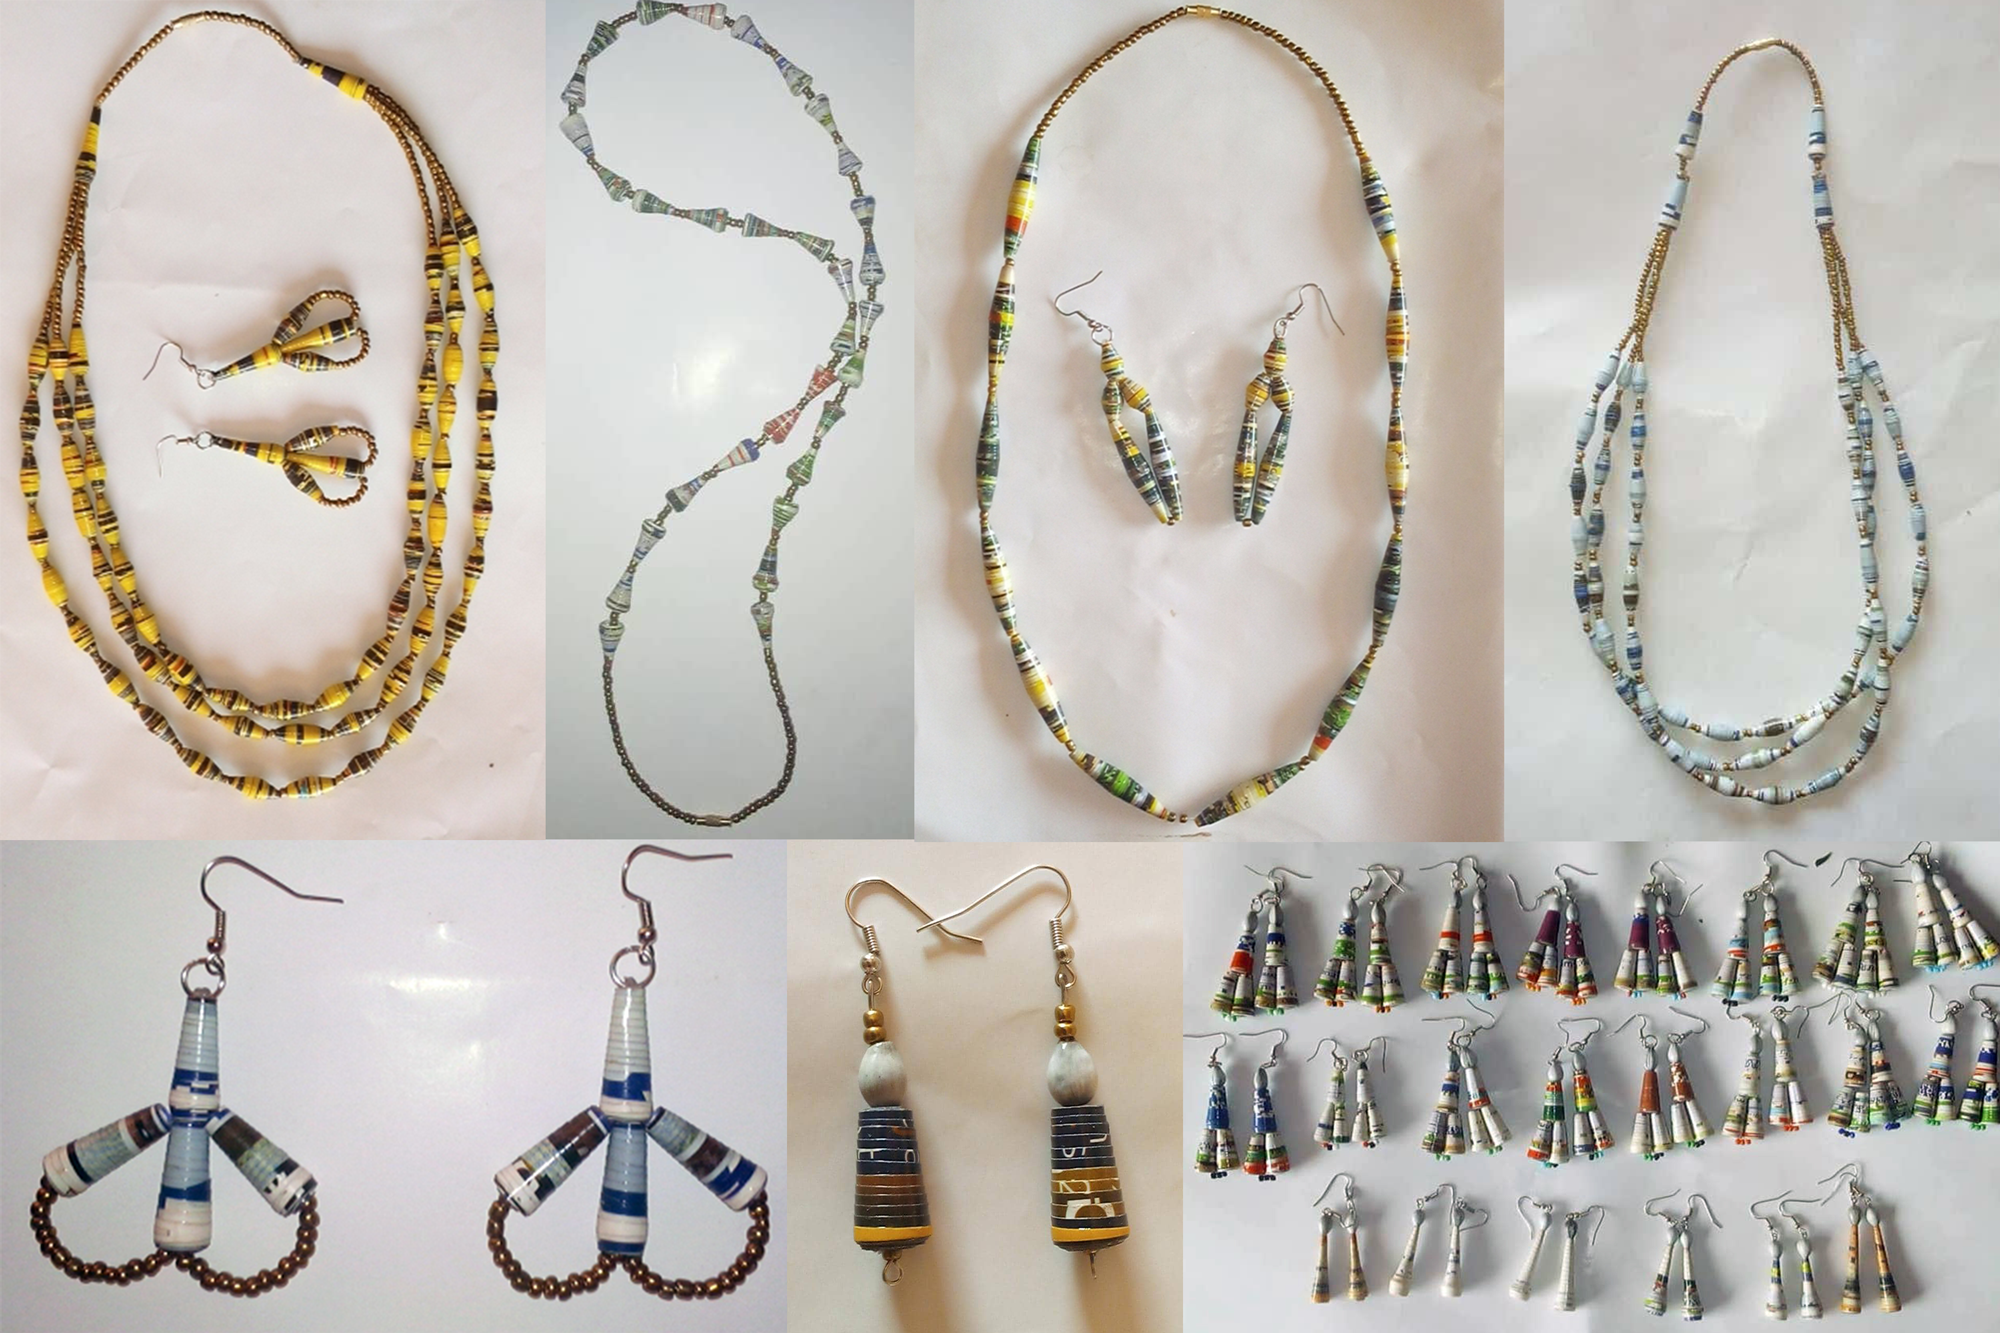 Collage of beaded necklaces and earrings